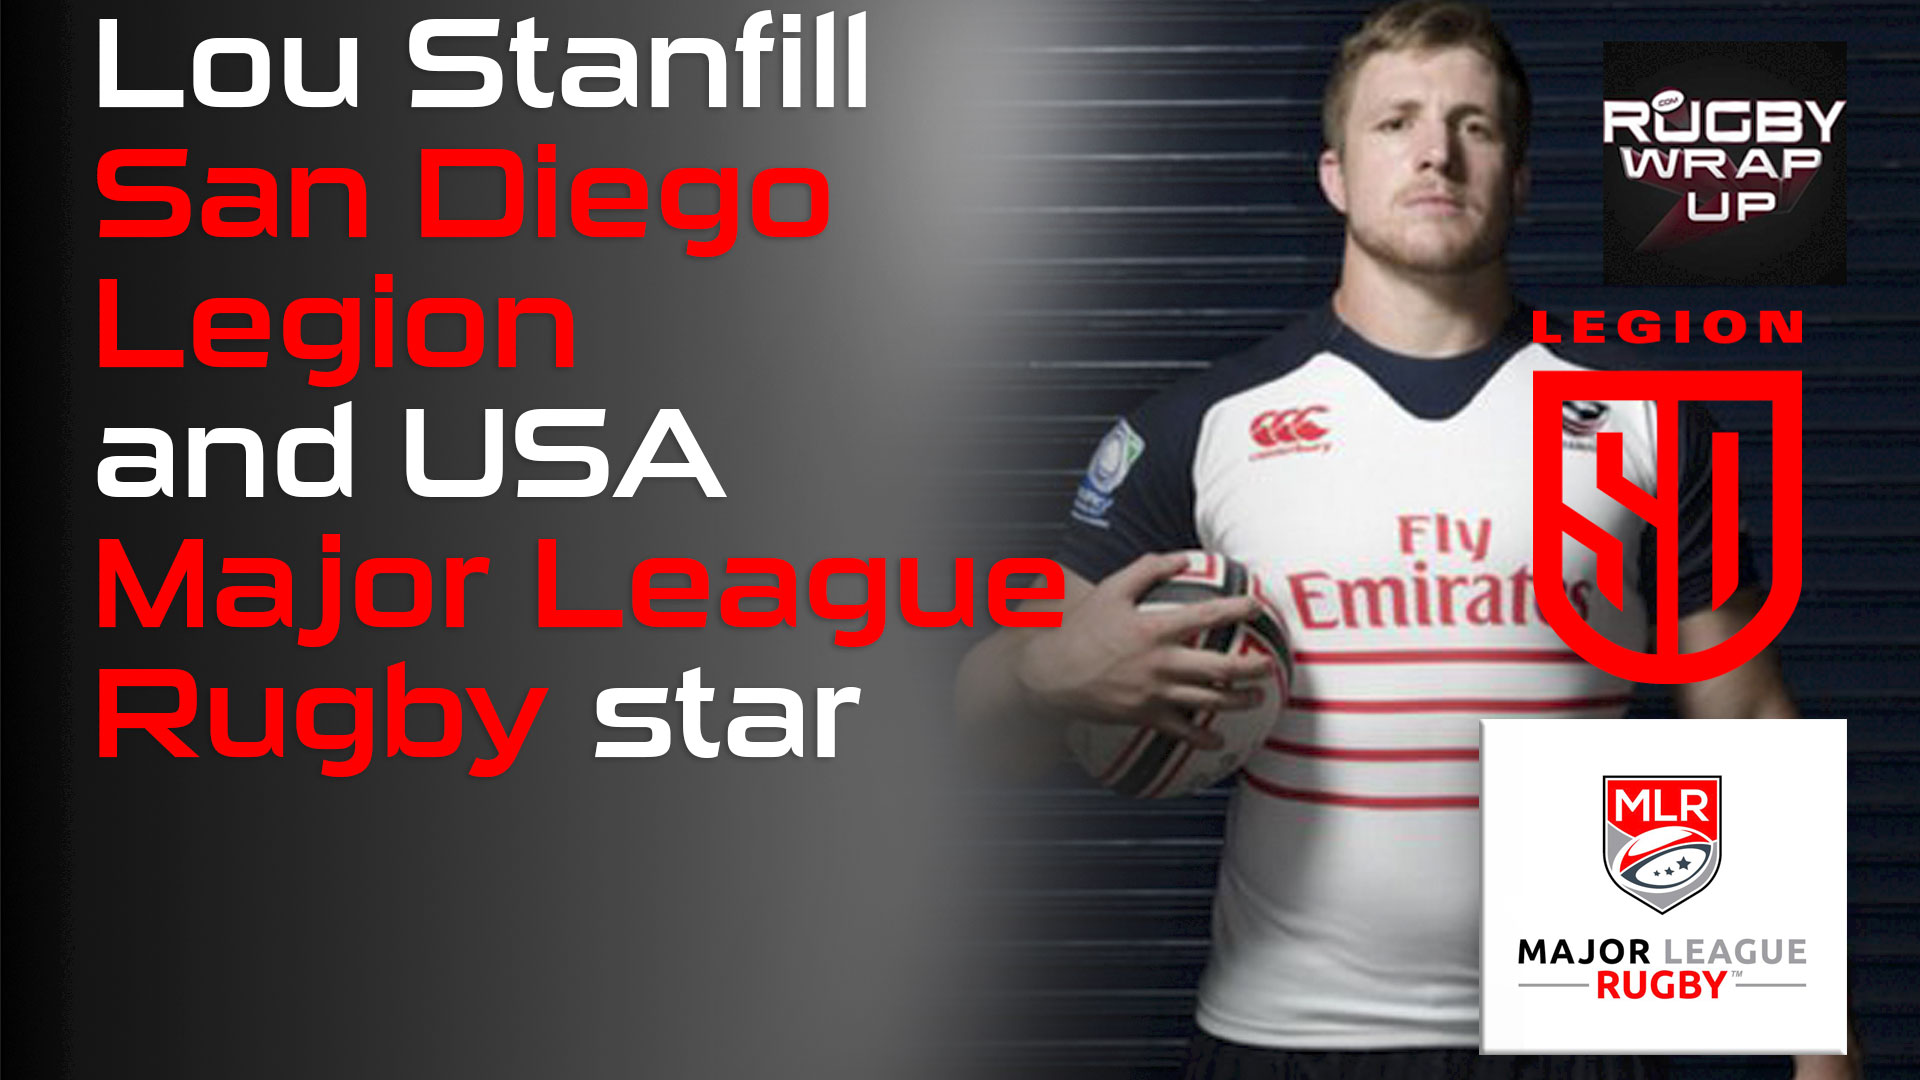 Rugby TV and Podcast: #MLR Star Lou Stanfill of SD Legion, Unfiltered with McCarthy and Lewis, Rugb_Wrap_Up